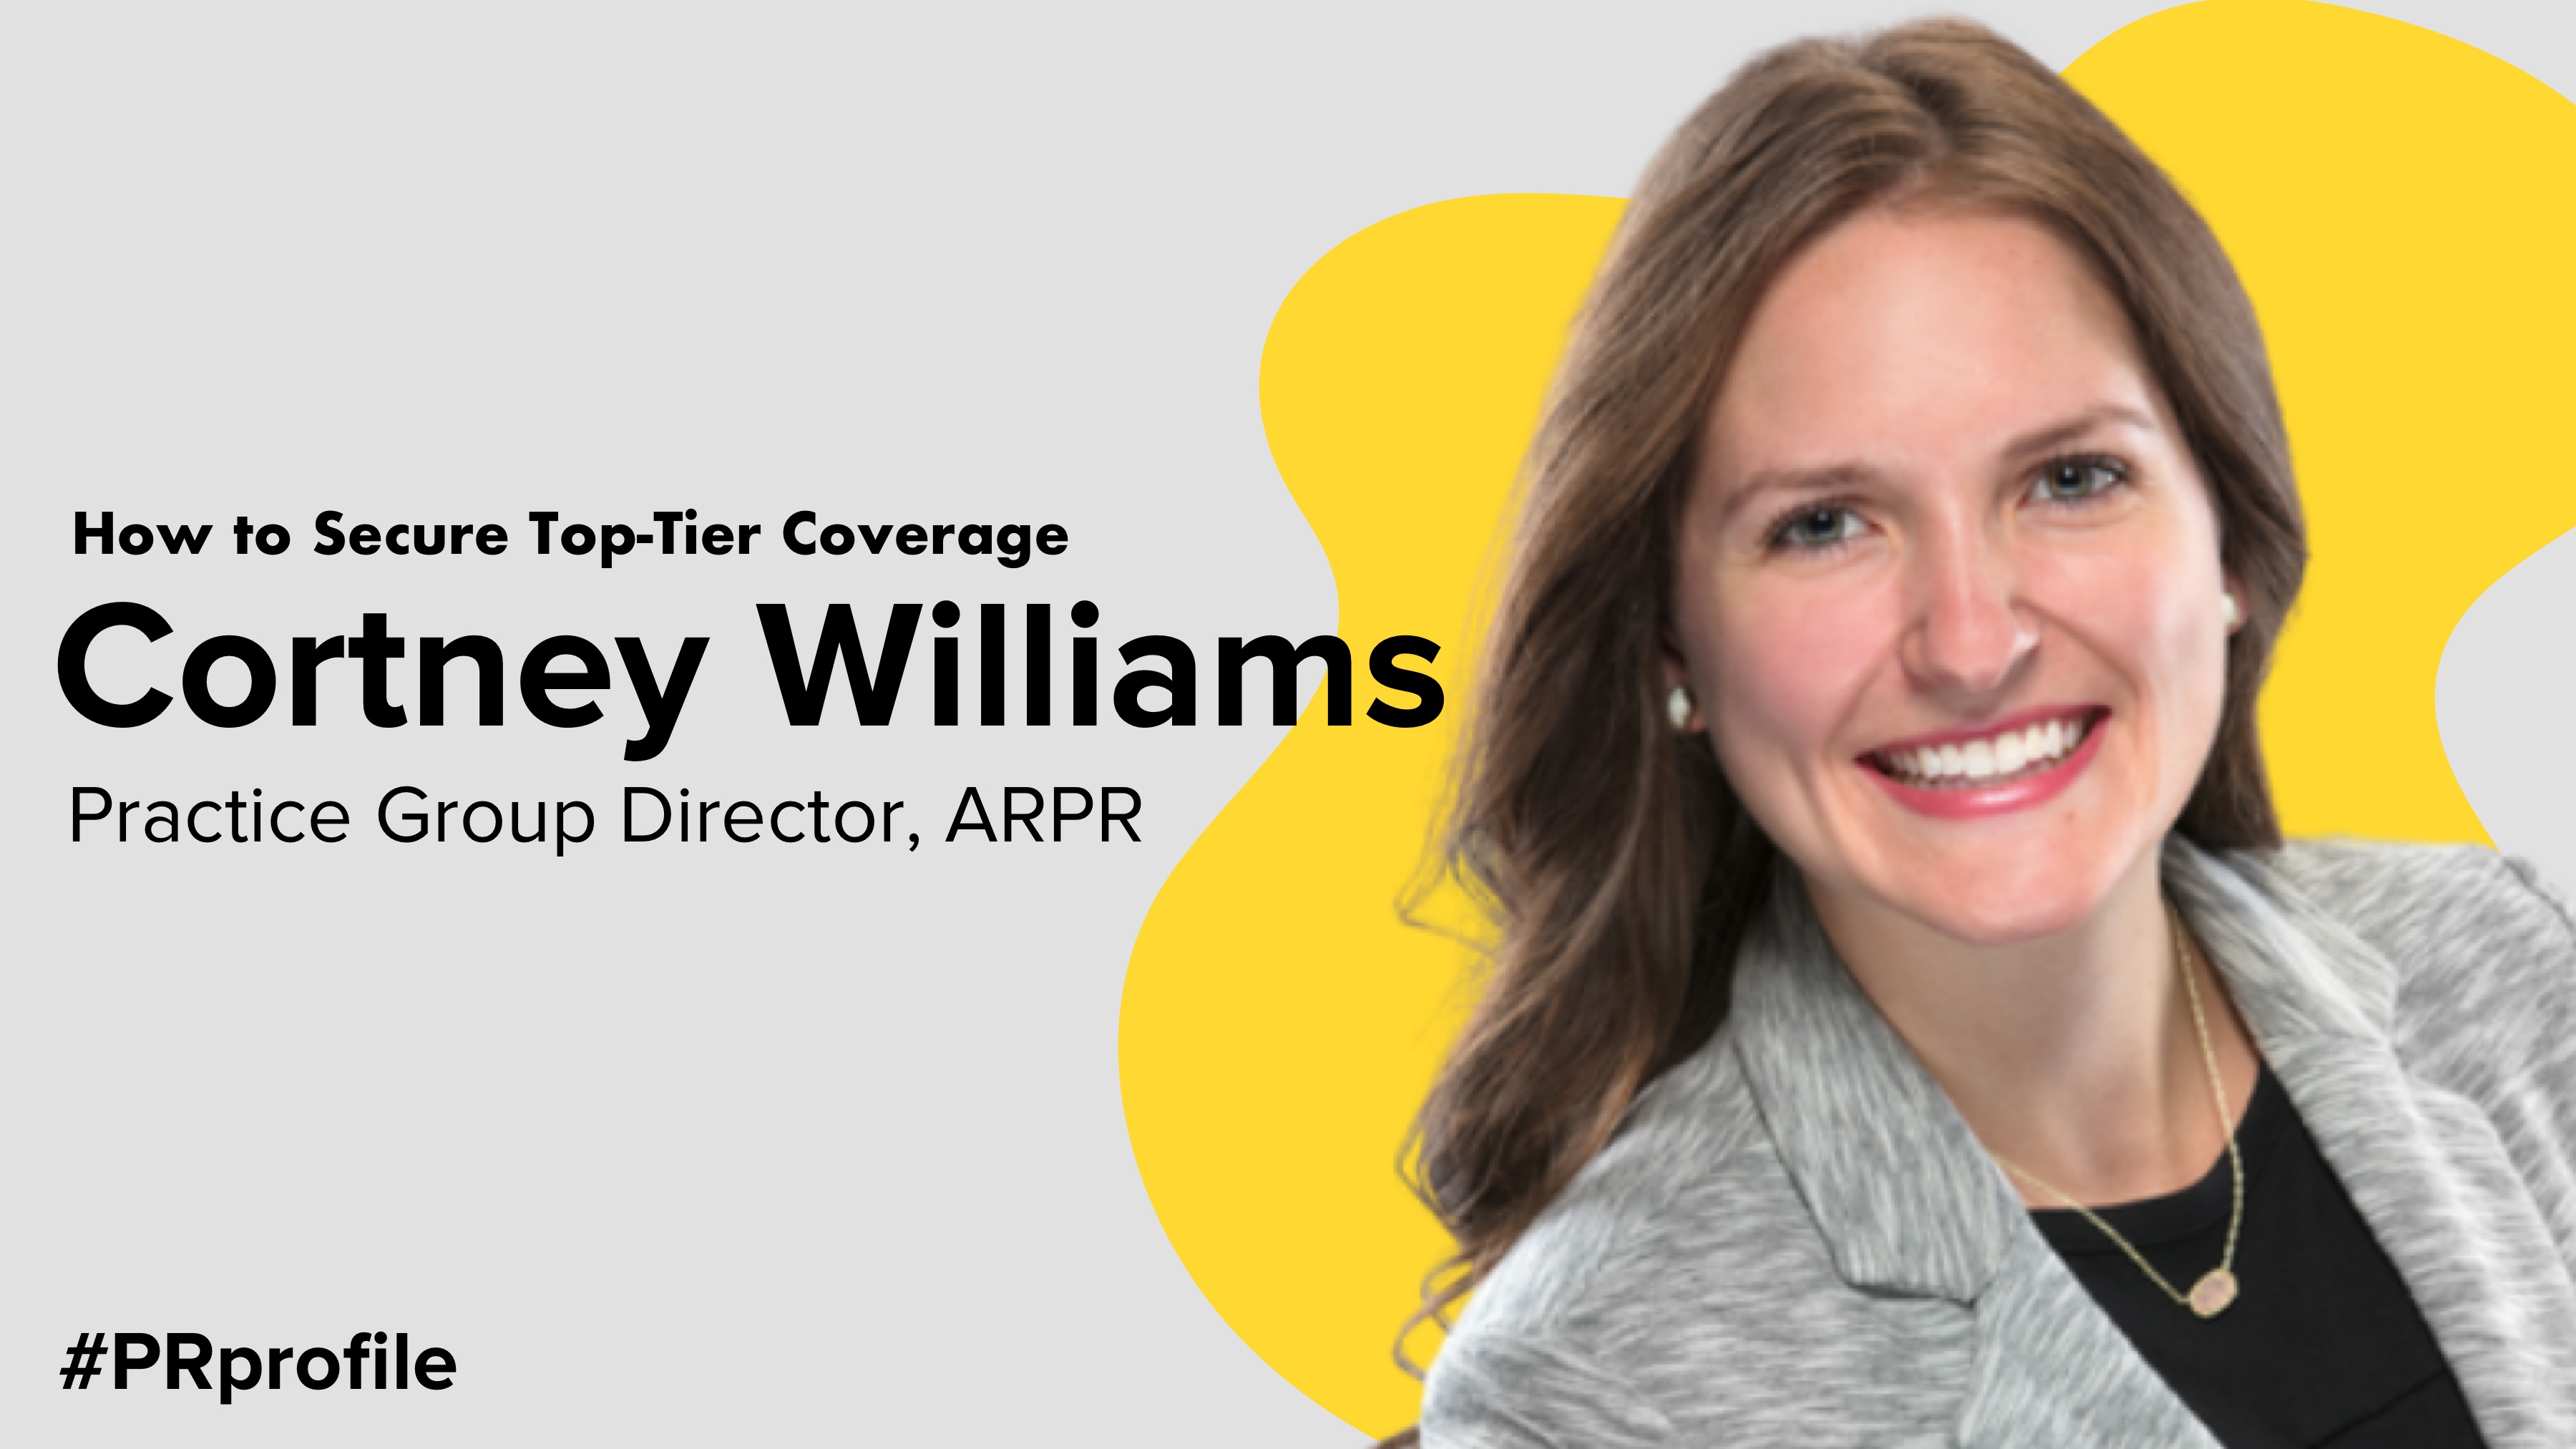 How to Secure Top-Tier Coverage with Cortney Williams, ARPR